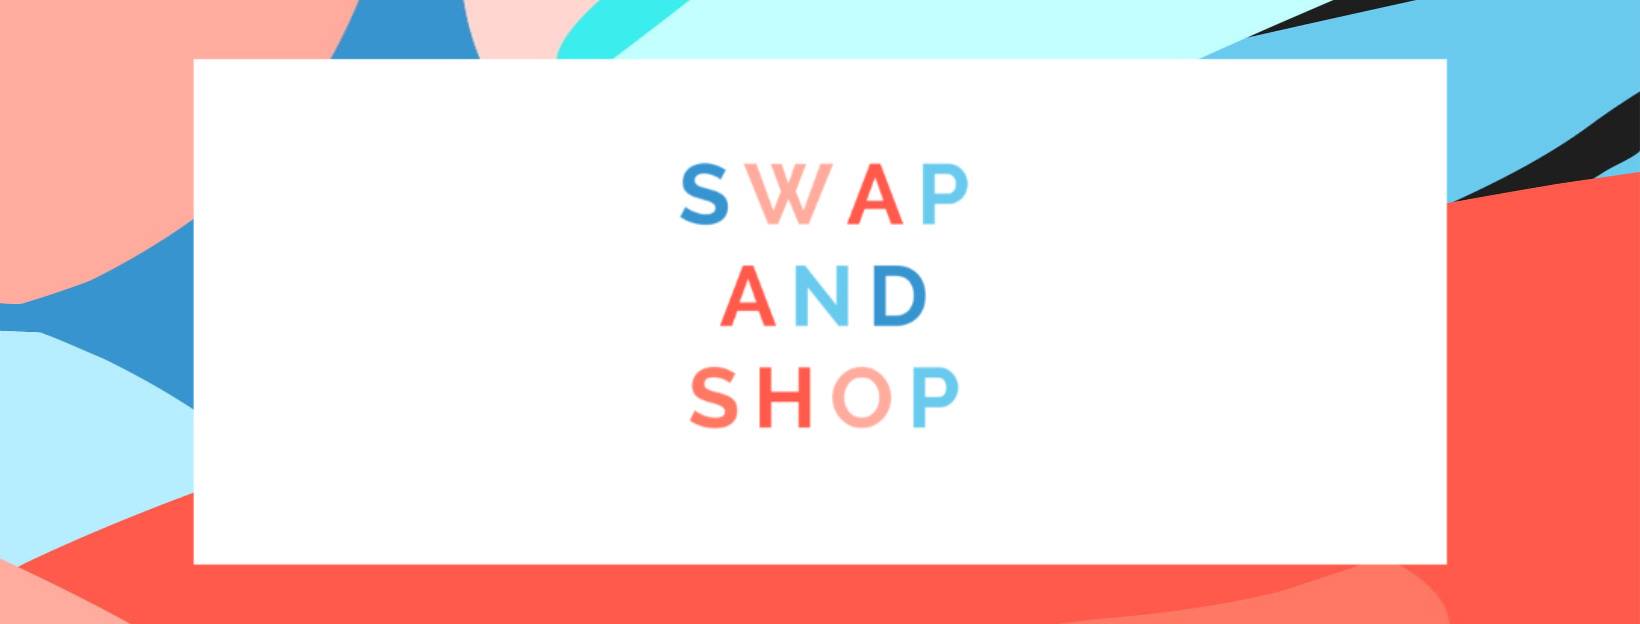 Swap and Shop typography | Tucson Clean and Beautiful, Inc.